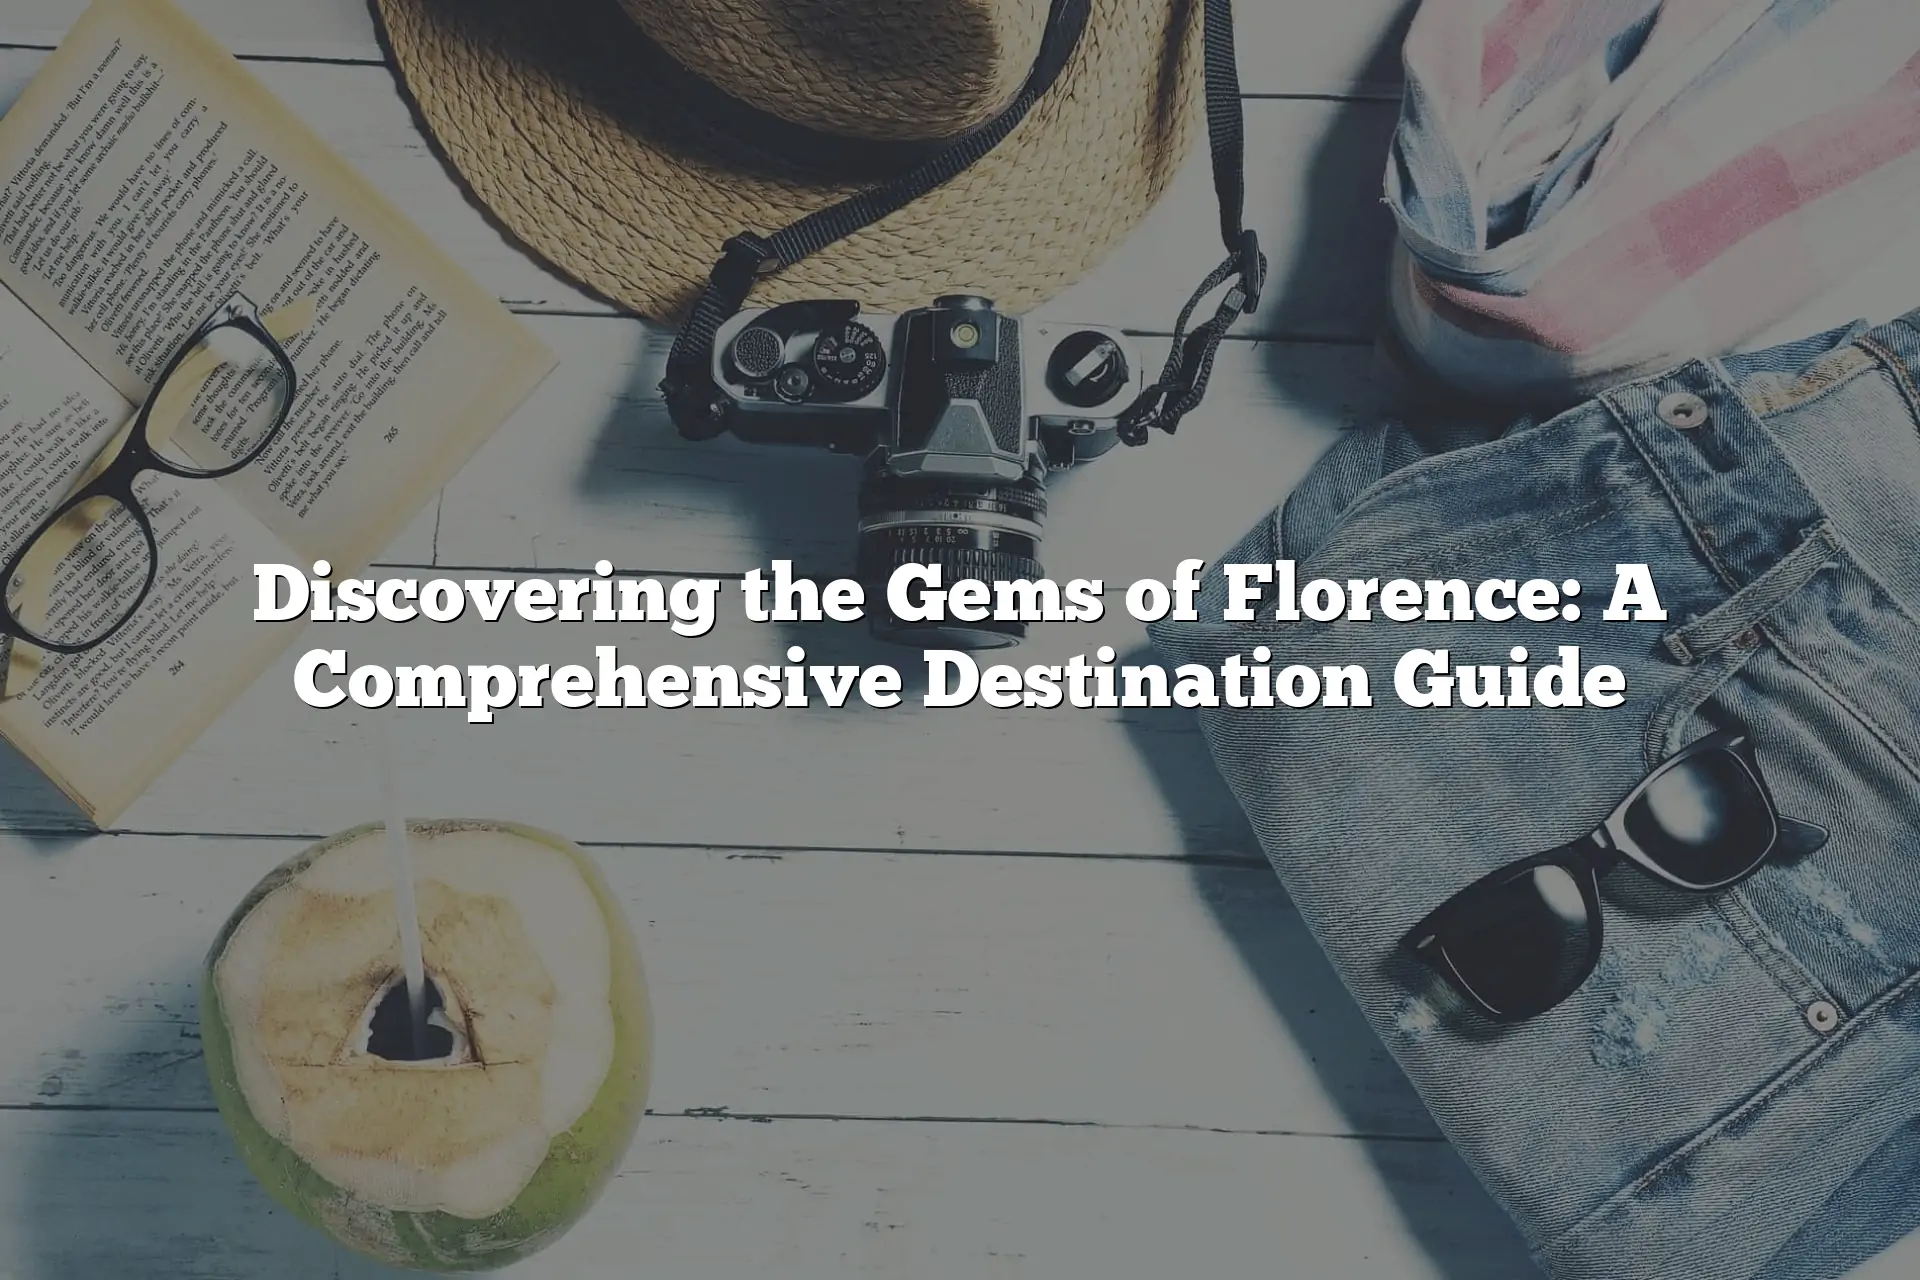 Discovering the Gems of Florence: A Comprehensive Destination Guide